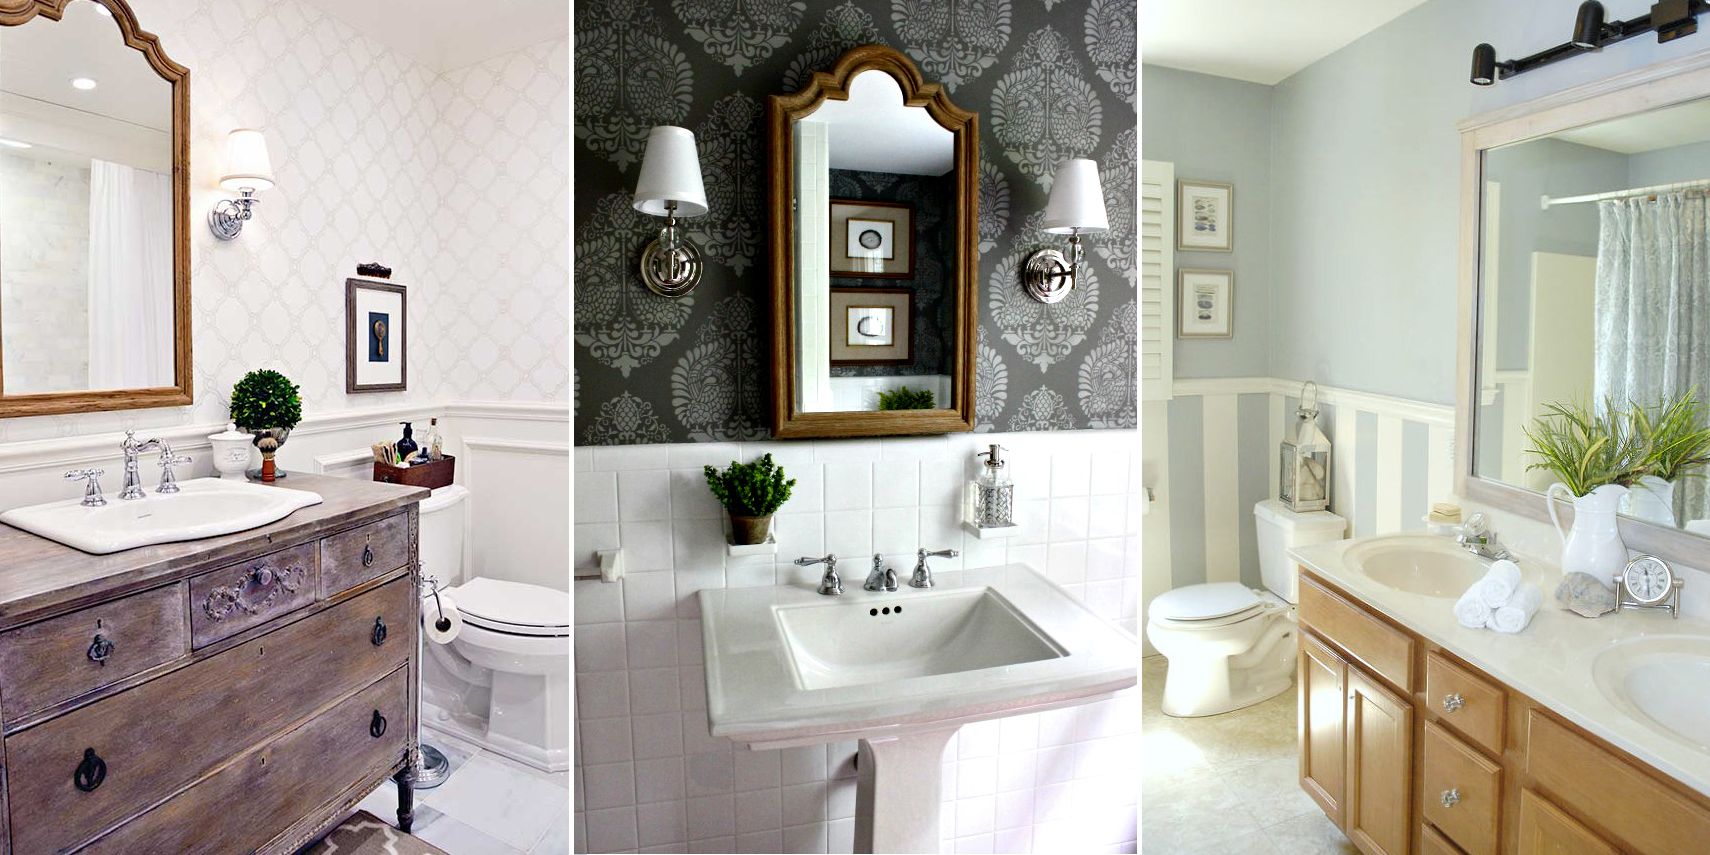 6 Tips To Make Your Bathroom a Room You Enjoy Being In